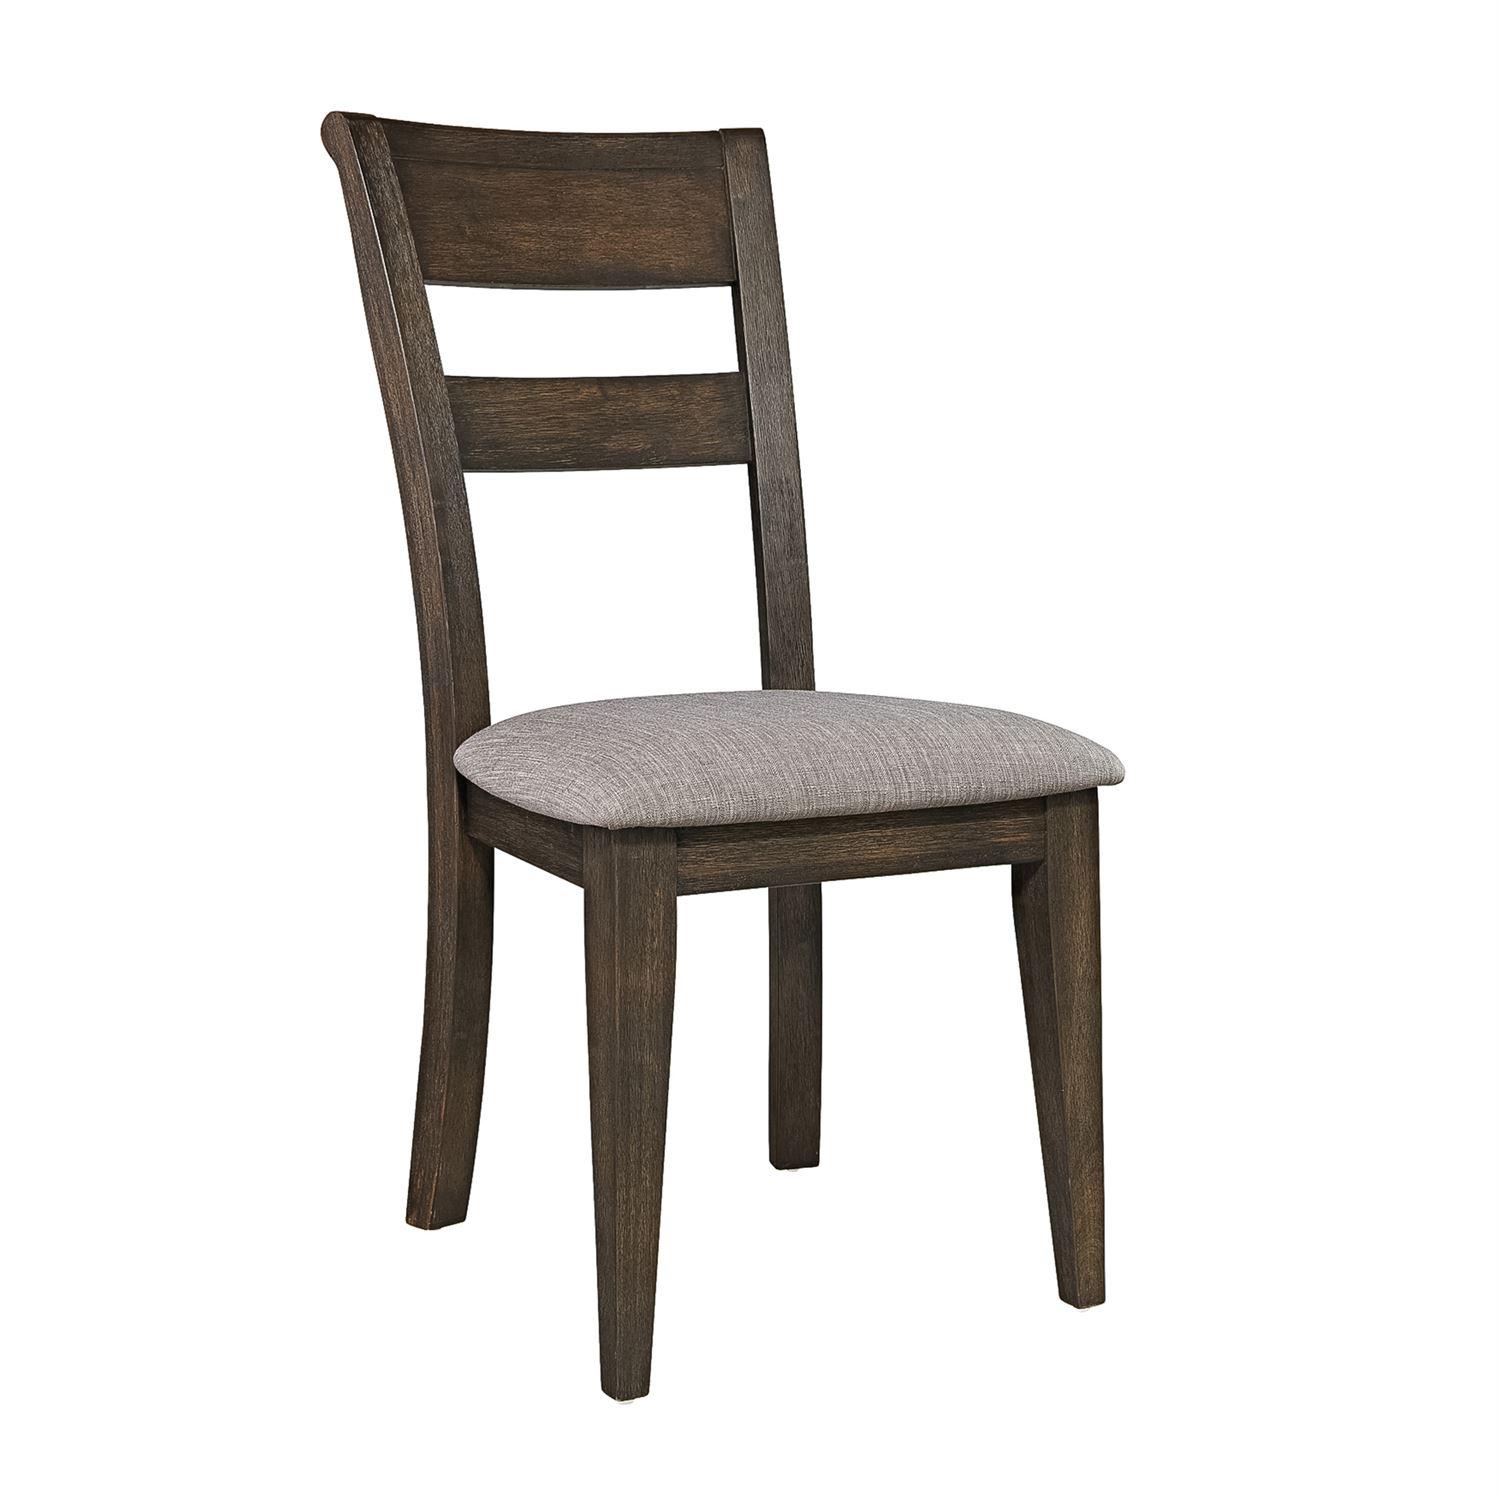 Rustic Dining Side Chair Double Bridge  (152-CD) Dining Side Chair 152-C2501S-2PC in Chestnut Fabric